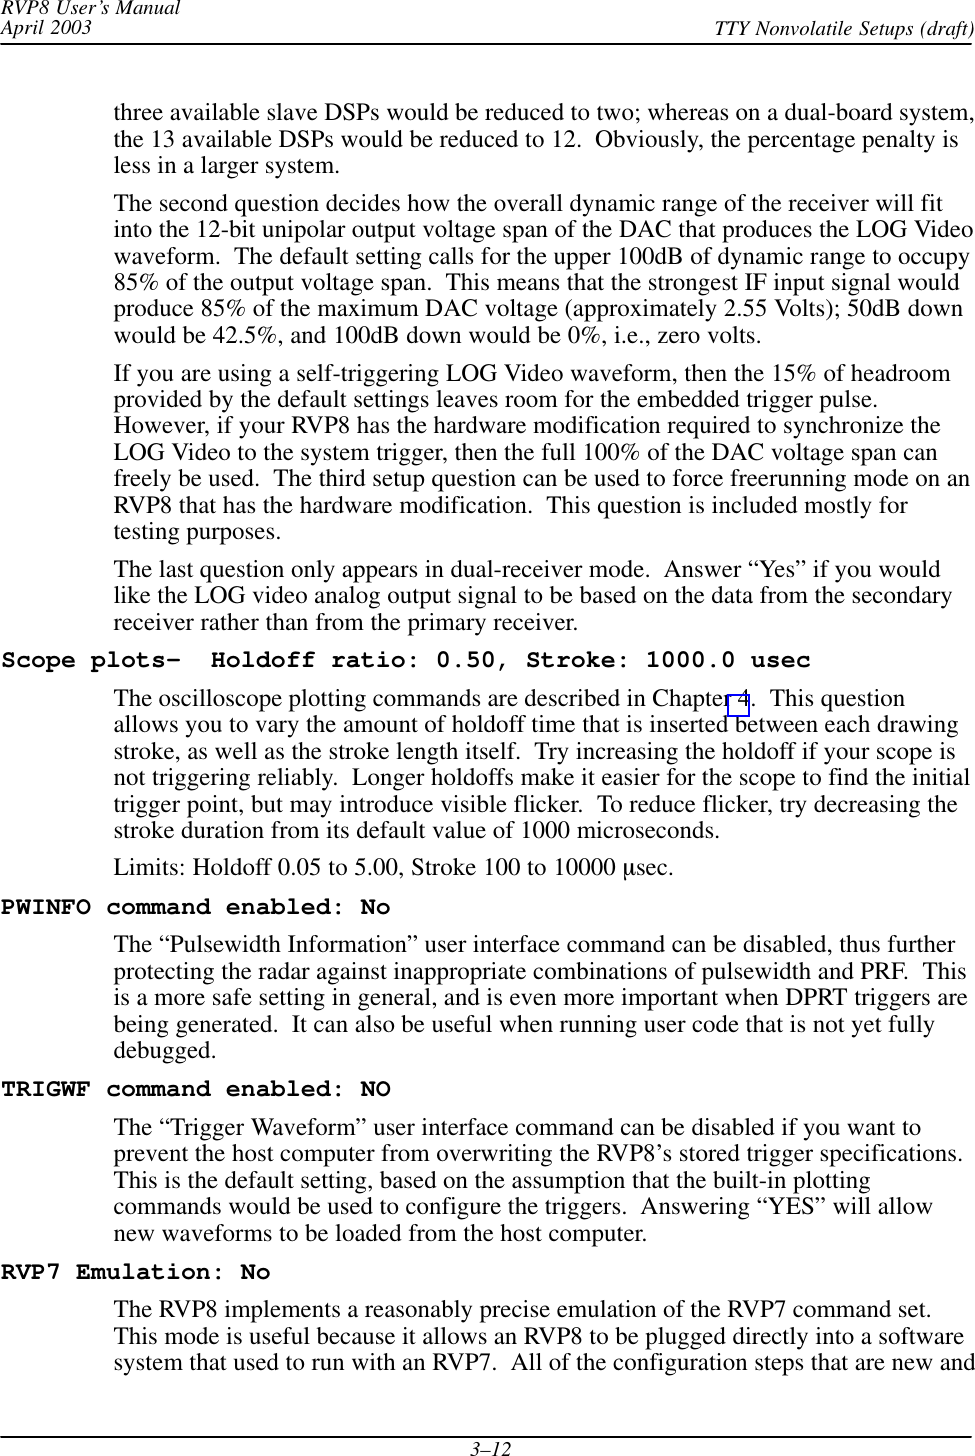 RVP8 User’s ManualApril 2003 TTY Nonvolatile Setups (draft)3–12three available slave DSPs would be reduced to two; whereas on a dual-board system,the 13 available DSPs would be reduced to 12.  Obviously, the percentage penalty isless in a larger system.The second question decides how the overall dynamic range of the receiver will fitinto the 12-bit unipolar output voltage span of the DAC that produces the LOG Videowaveform.  The default setting calls for the upper 100dB of dynamic range to occupy85% of the output voltage span.  This means that the strongest IF input signal wouldproduce 85% of the maximum DAC voltage (approximately 2.55 Volts); 50dB downwould be 42.5%, and 100dB down would be 0%, i.e., zero volts.If you are using a self-triggering LOG Video waveform, then the 15% of headroomprovided by the default settings leaves room for the embedded trigger pulse.However, if your RVP8 has the hardware modification required to synchronize theLOG Video to the system trigger, then the full 100% of the DAC voltage span canfreely be used.  The third setup question can be used to force freerunning mode on anRVP8 that has the hardware modification.  This question is included mostly fortesting purposes.The last question only appears in dual-receiver mode.  Answer “Yes” if you wouldlike the LOG video analog output signal to be based on the data from the secondaryreceiver rather than from the primary receiver.Scope plots–  Holdoff ratio: 0.50, Stroke: 1000.0 usecThe oscilloscope plotting commands are described in Chapter 4.  This questionallows you to vary the amount of holdoff time that is inserted between each drawingstroke, as well as the stroke length itself.  Try increasing the holdoff if your scope isnot triggering reliably.  Longer holdoffs make it easier for the scope to find the initialtrigger point, but may introduce visible flicker.  To reduce flicker, try decreasing thestroke duration from its default value of 1000 microseconds.Limits: Holdoff 0.05 to 5.00, Stroke 100 to 10000 sec.PWINFO command enabled: NoThe “Pulsewidth Information” user interface command can be disabled, thus furtherprotecting the radar against inappropriate combinations of pulsewidth and PRF.  Thisis a more safe setting in general, and is even more important when DPRT triggers arebeing generated.  It can also be useful when running user code that is not yet fullydebugged.TRIGWF command enabled: NOThe “Trigger Waveform” user interface command can be disabled if you want toprevent the host computer from overwriting the RVP8’s stored trigger specifications.This is the default setting, based on the assumption that the built-in plottingcommands would be used to configure the triggers.  Answering “YES” will allownew waveforms to be loaded from the host computer.RVP7 Emulation: NoThe RVP8 implements a reasonably precise emulation of the RVP7 command set.This mode is useful because it allows an RVP8 to be plugged directly into a softwaresystem that used to run with an RVP7.  All of the configuration steps that are new and